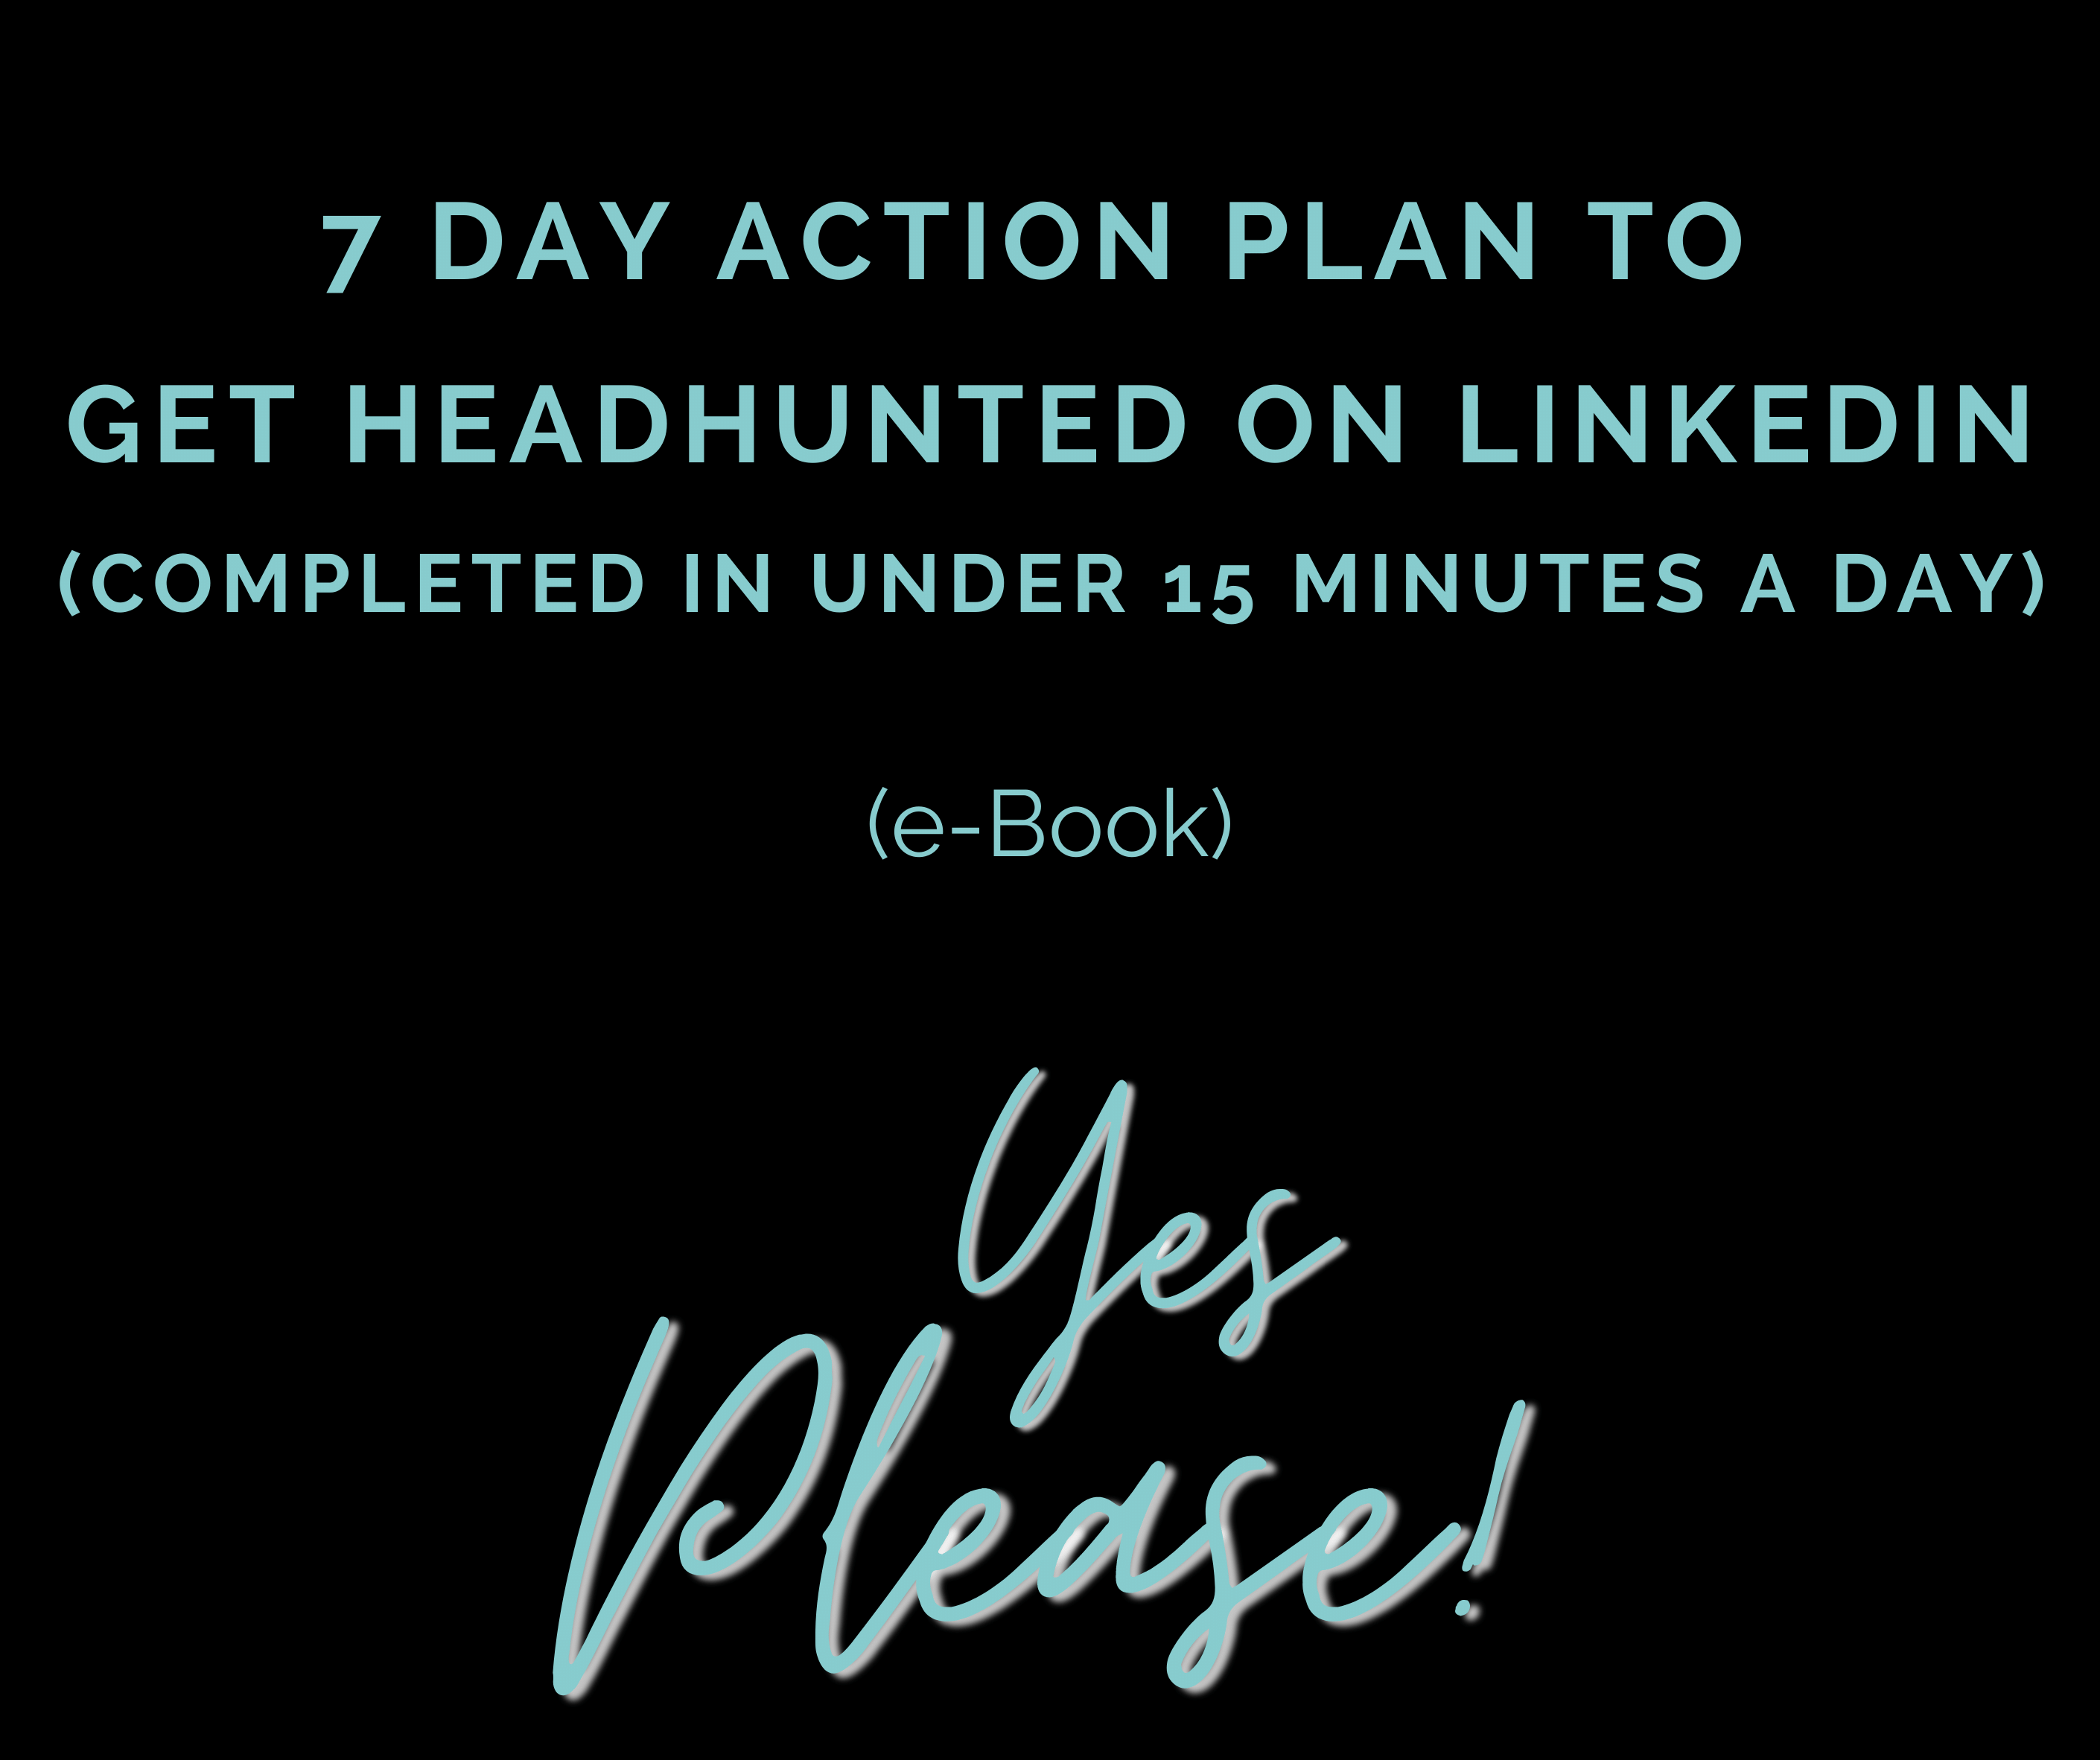 7 DAY ACTION PLAN TO GET HEADHUNTED ON LINKEDIN (IN UNDER 15 MINUTES A DAY)